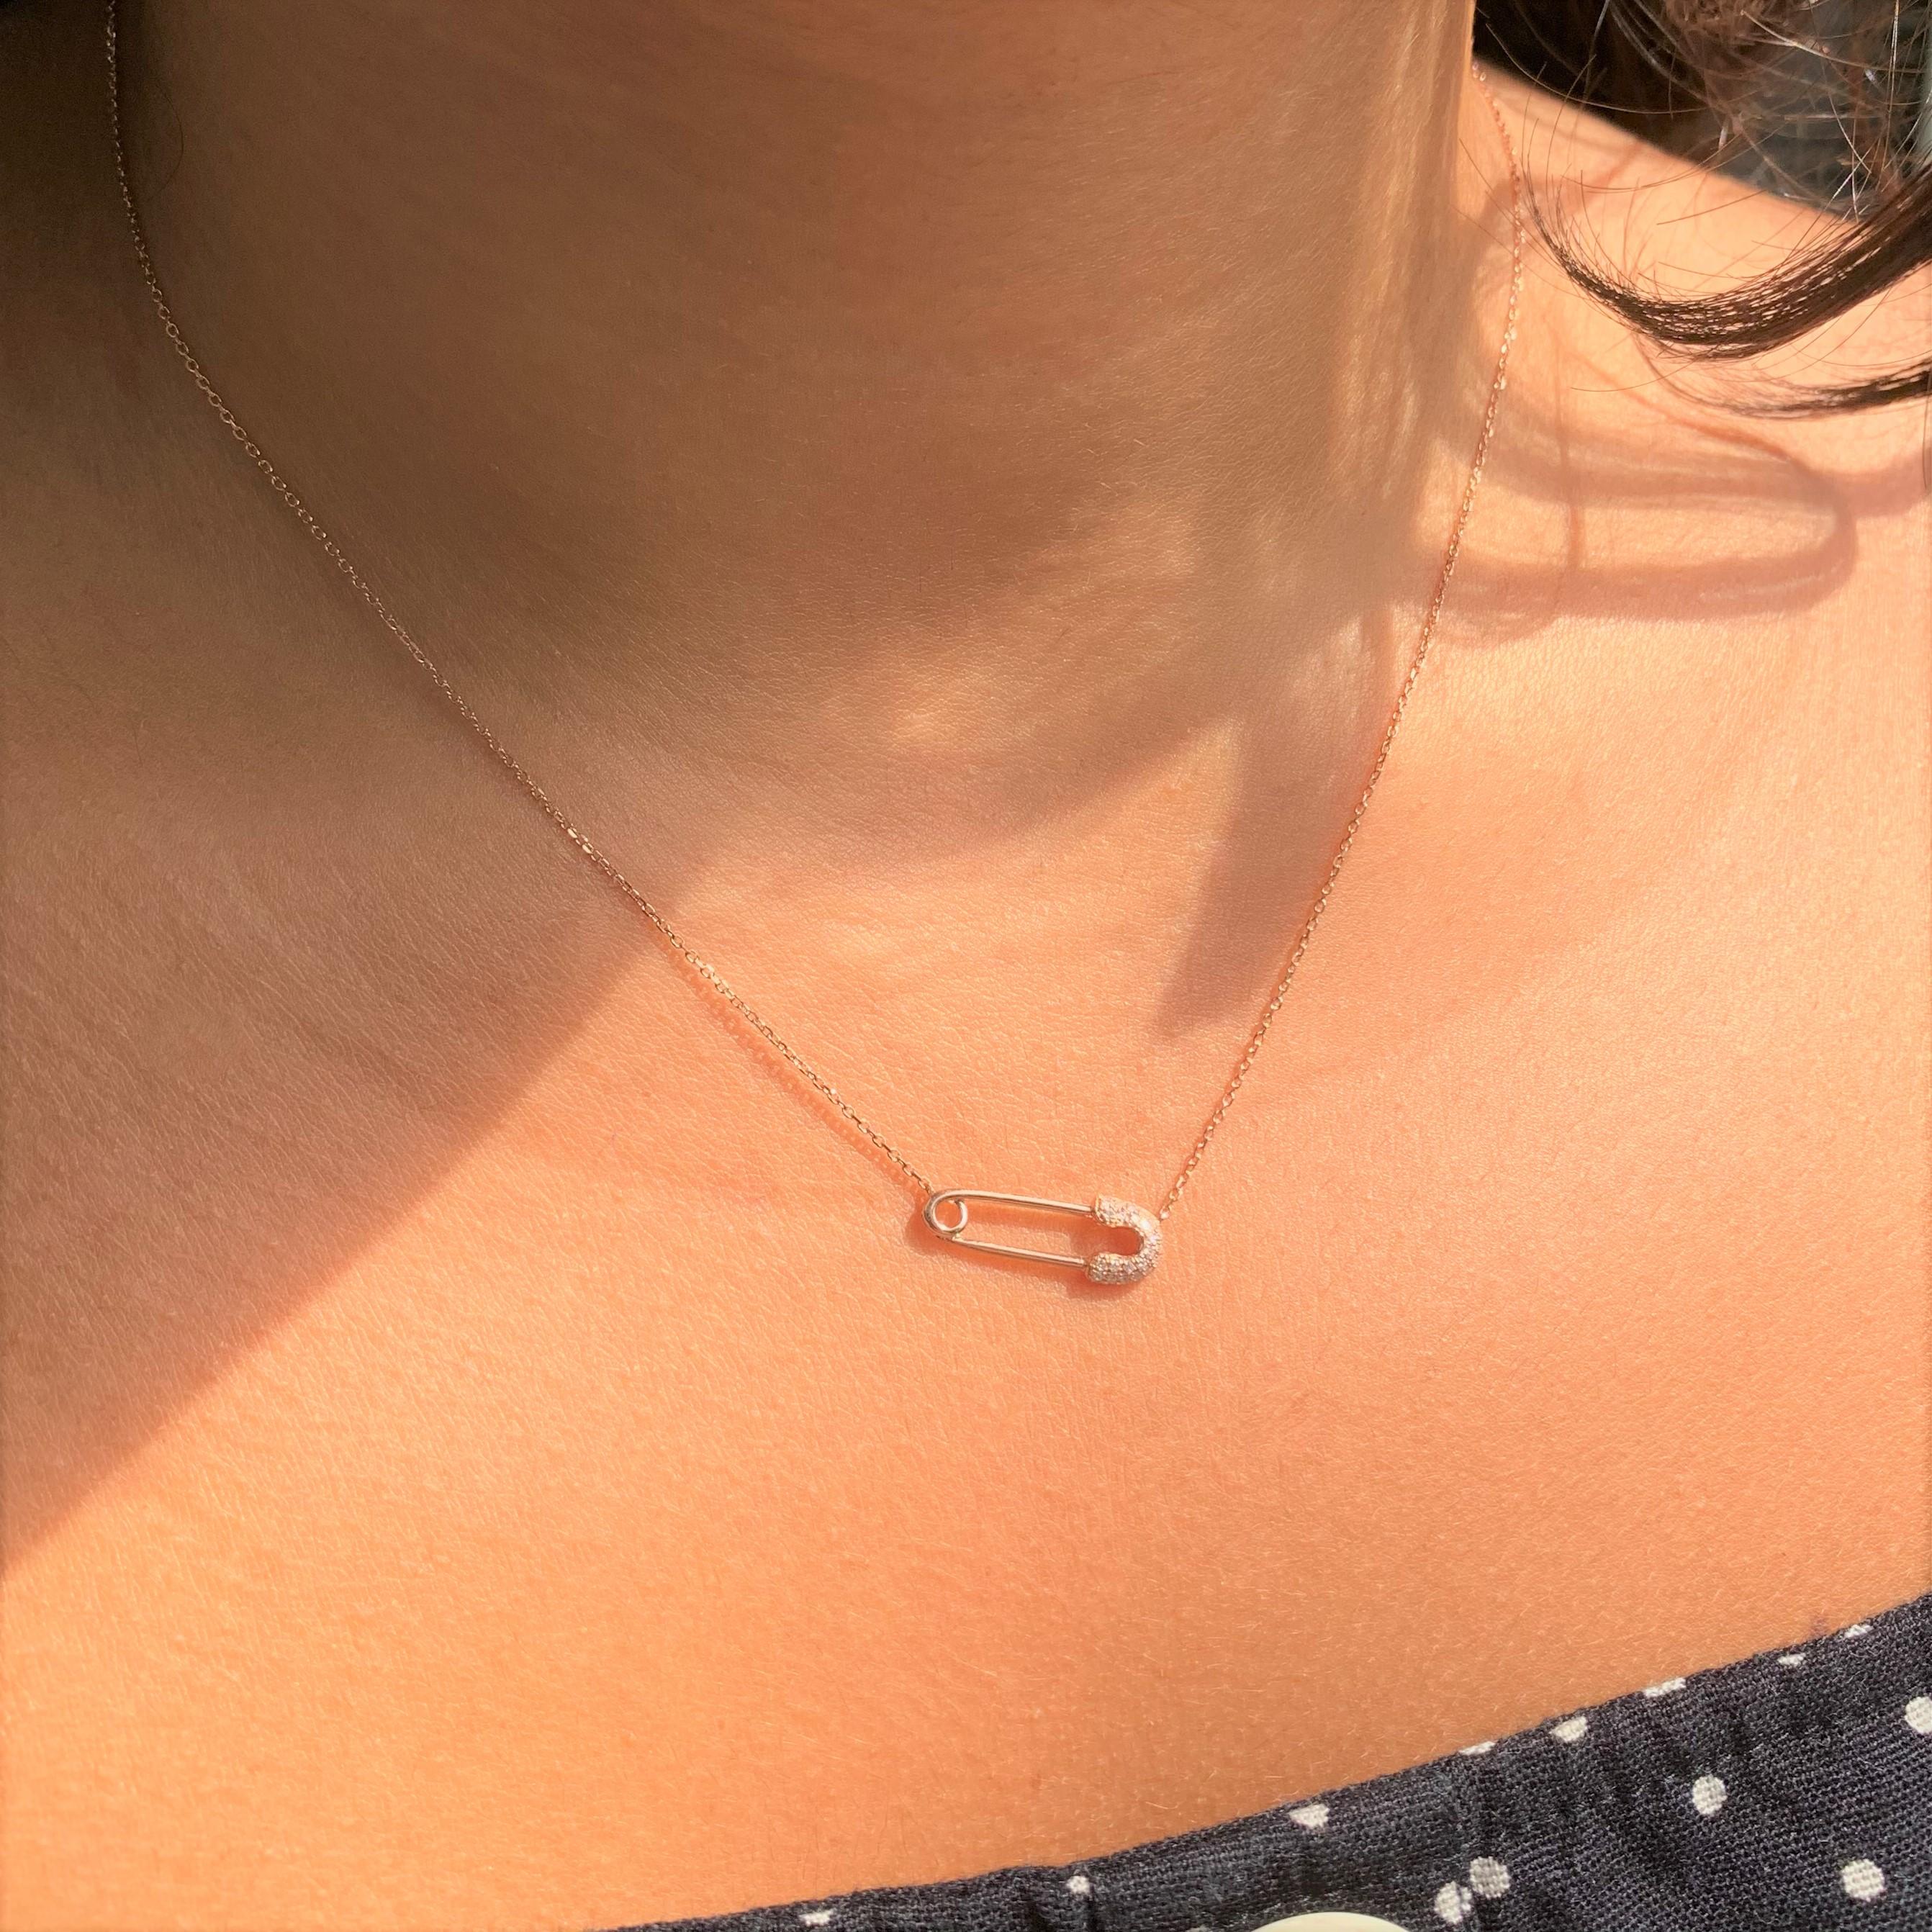 This is an adorable safety pin necklace crafted of 14K Rose Gold, featuring 23 round natural White Diamonds weighing 0.07 carats. Gold weight is 2.11 grams. Chain is adjustable 16